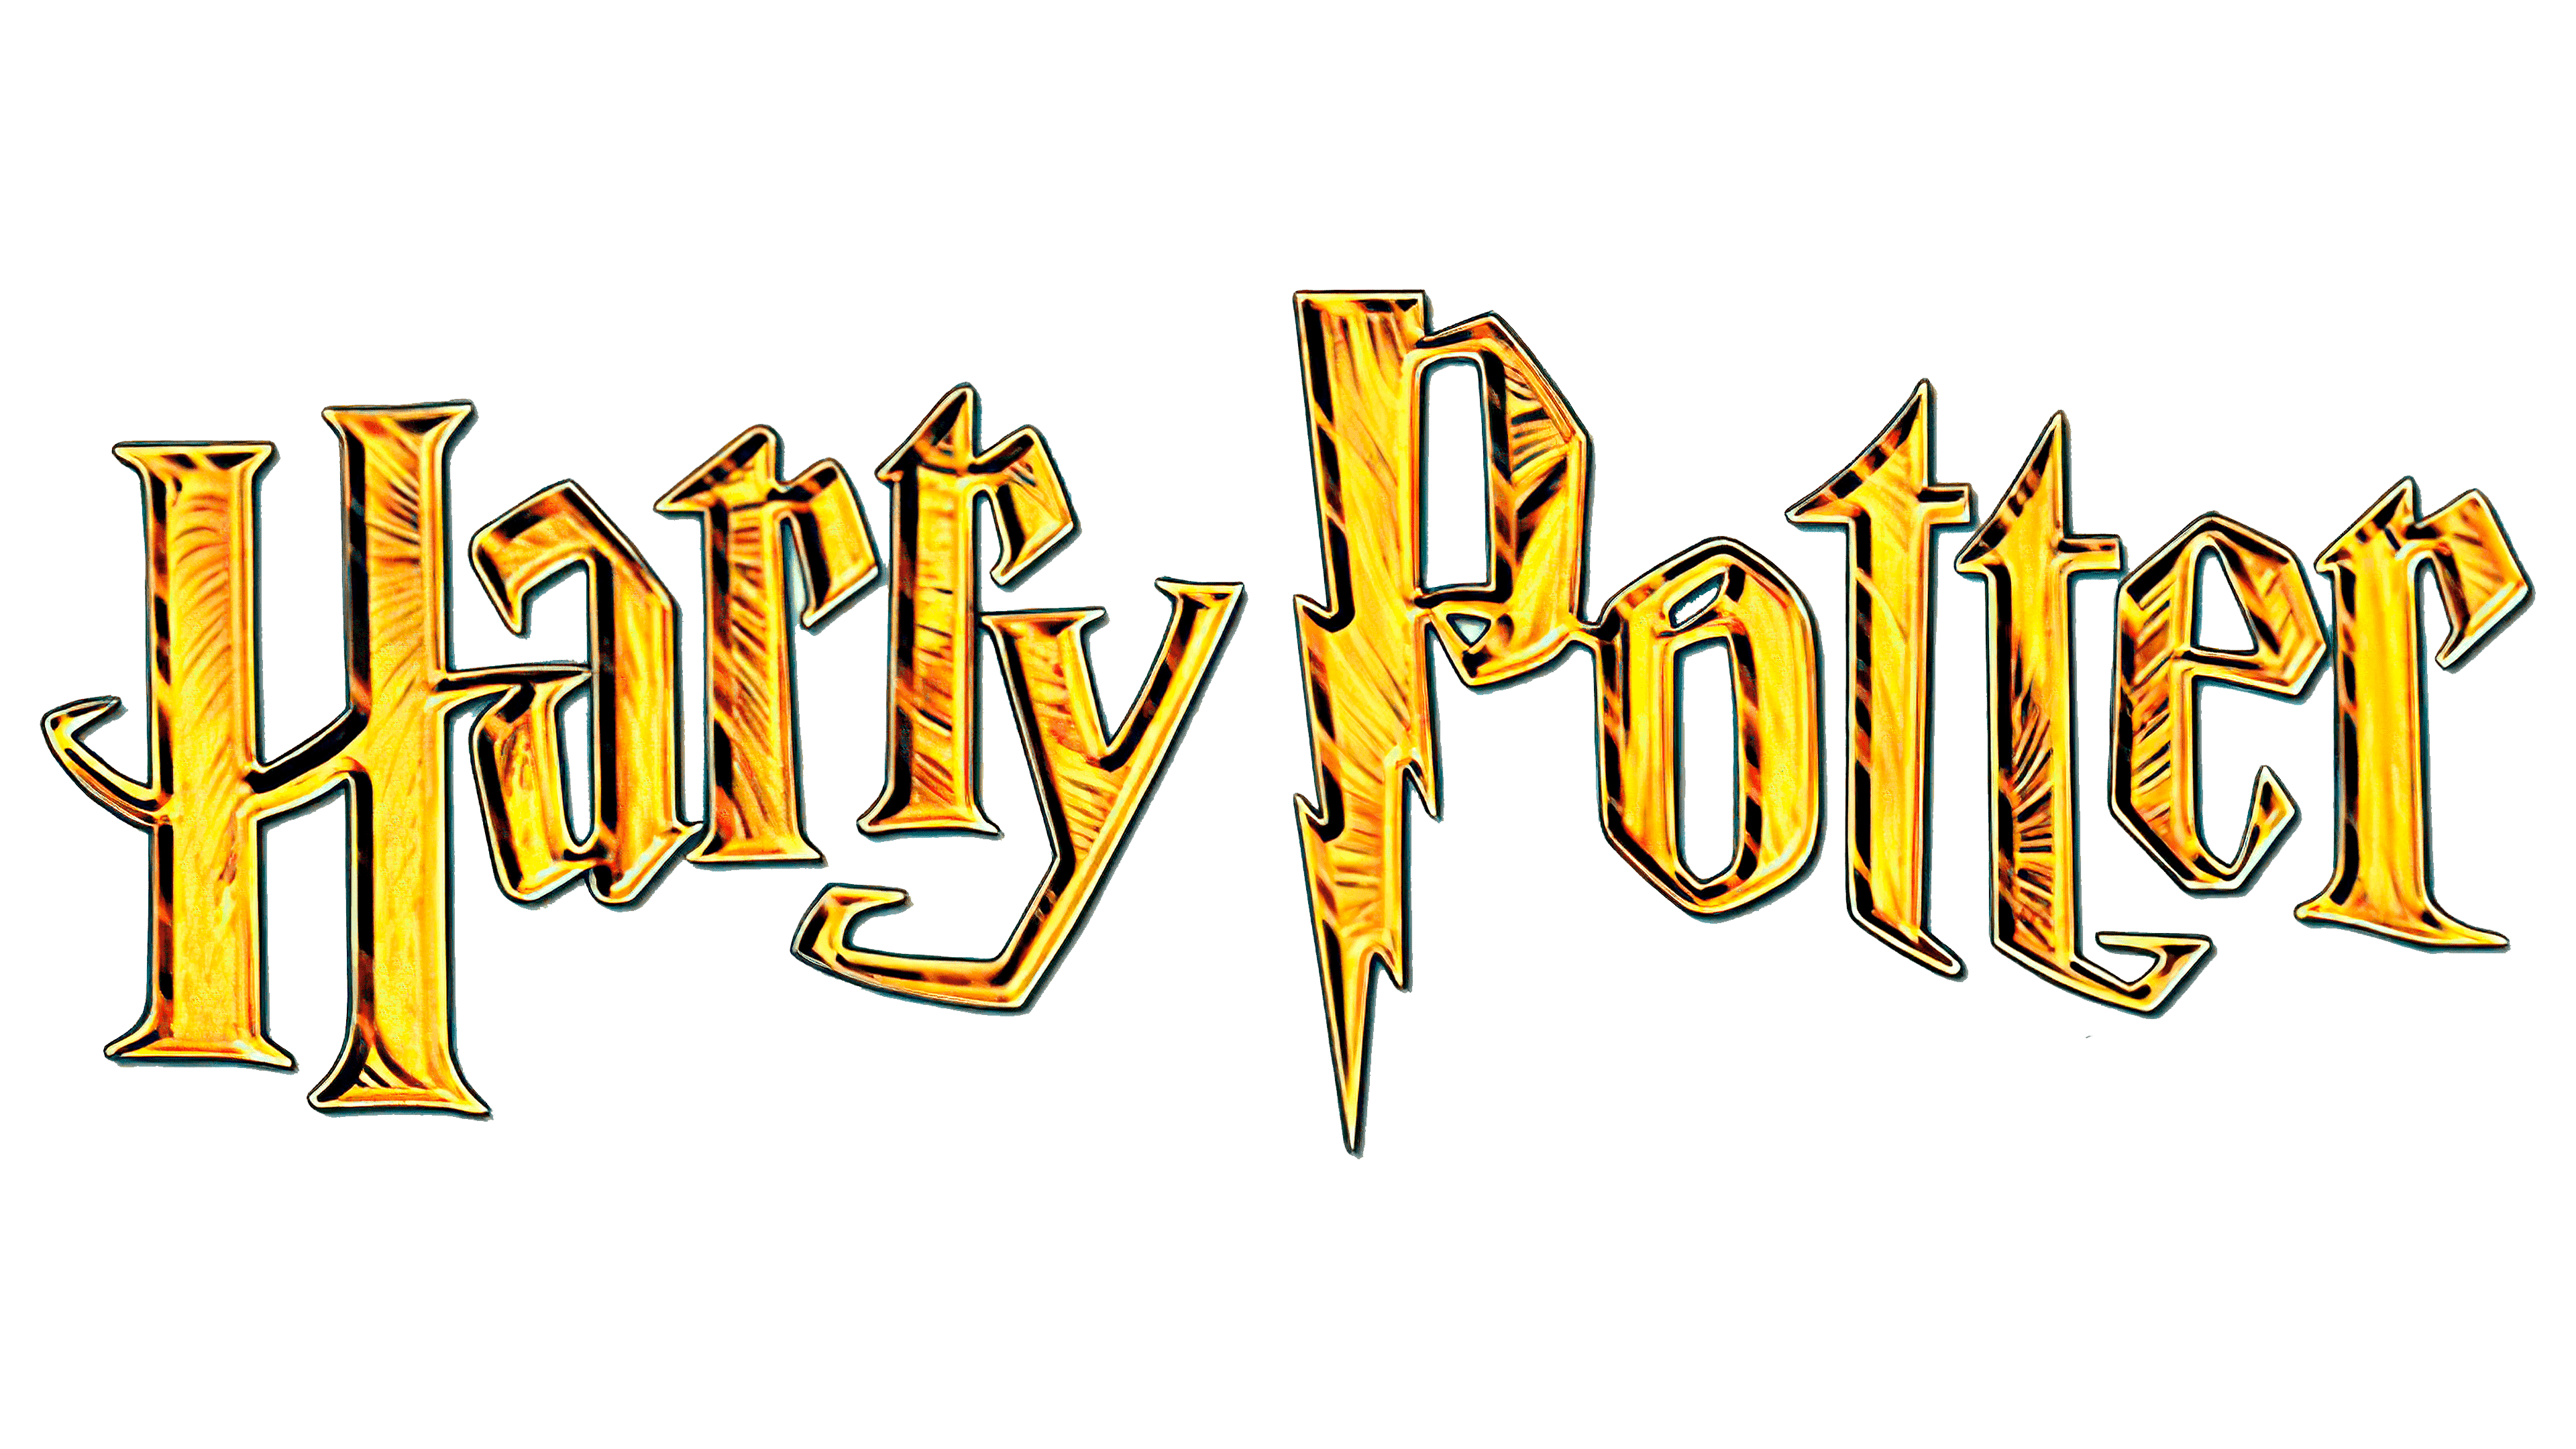 Hogwarts Logo and symbol, meaning, history, PNG, brand